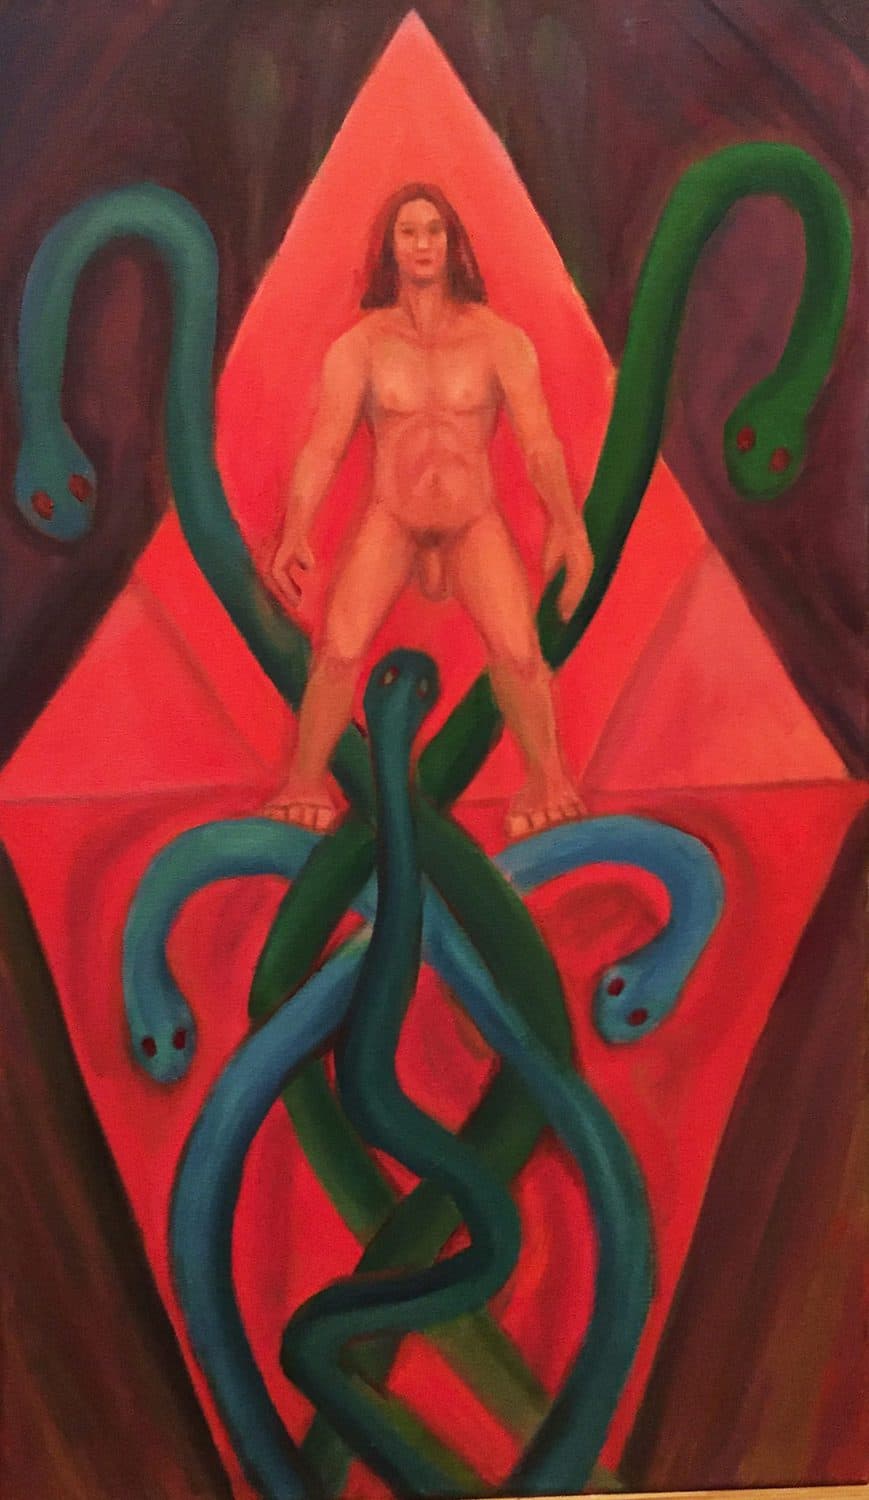 nude man standing facing viewer with four pairs of snakes around him and one snake approaching his genitals